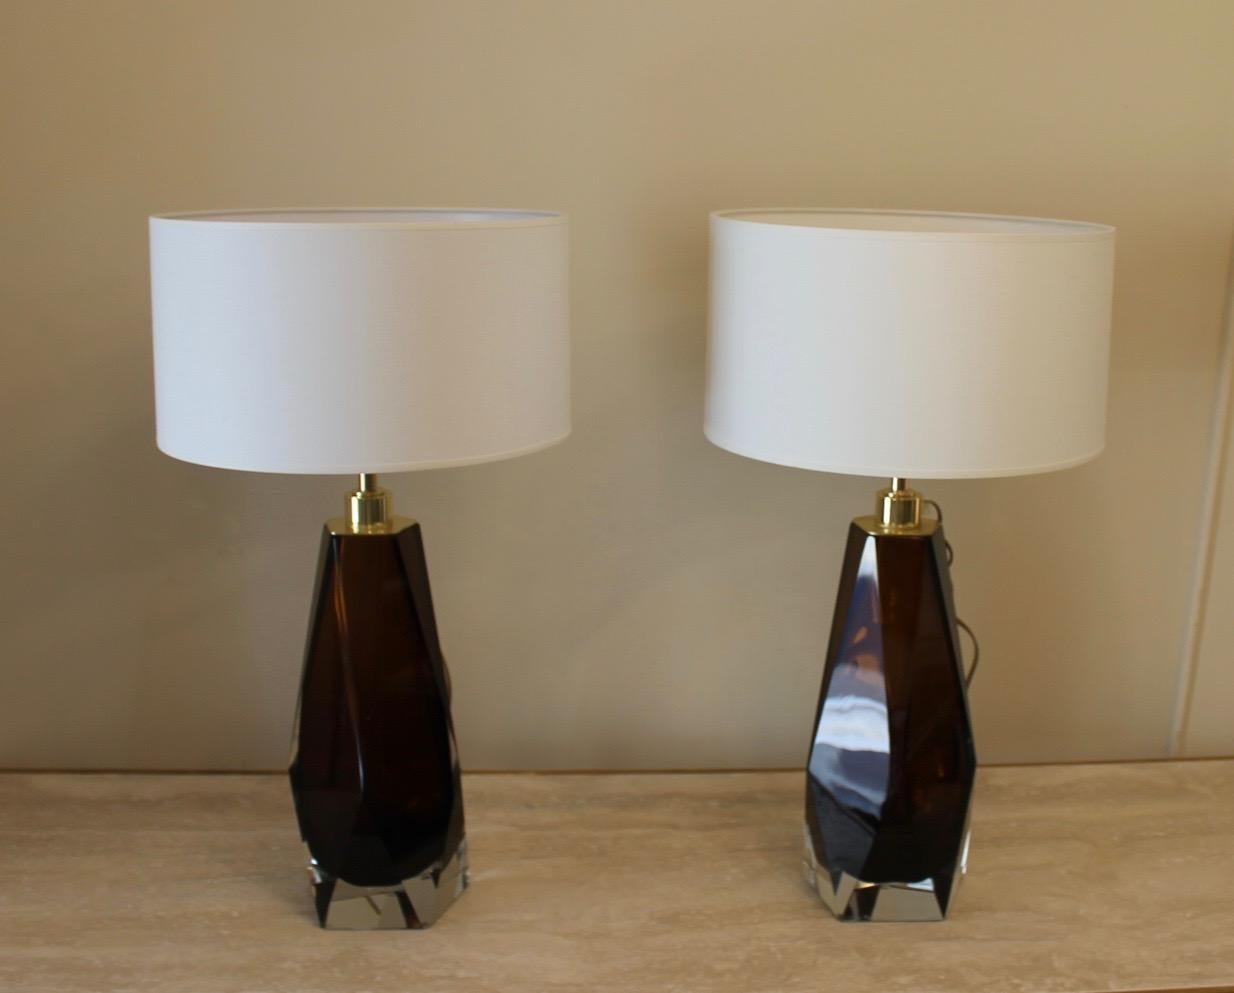 Pair of smoked brown lamps, Murano, brass structure, Modern, with lampshade.
The lamps are signed Toso Murano.